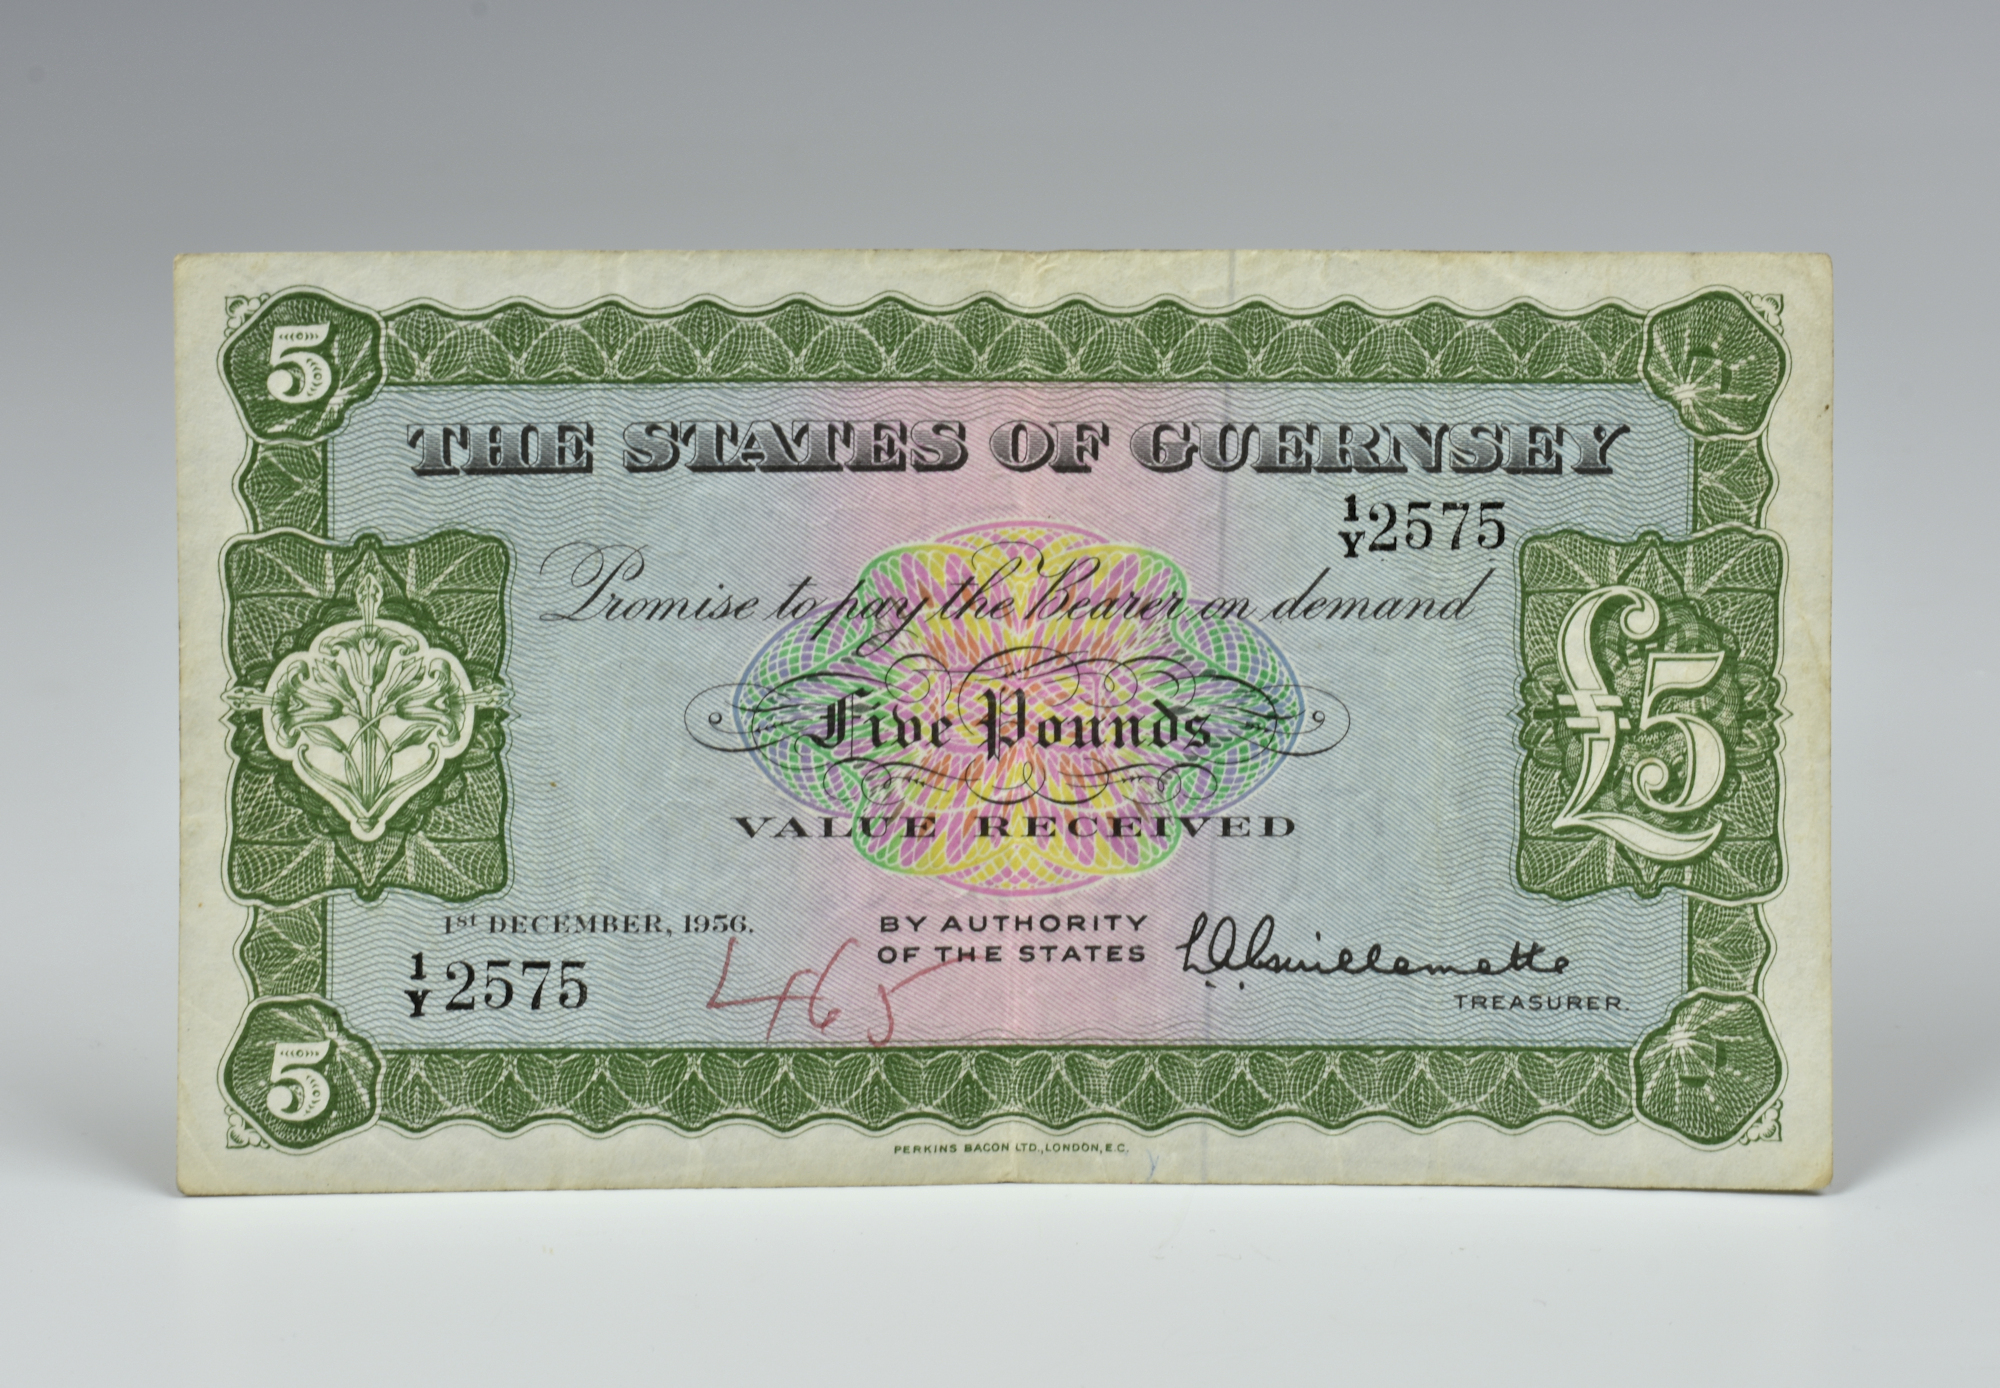 BRITISH BANKNOTE: States of Guernsey £5, States of Guernsey, £5, GN45, 1st December 1956, serial